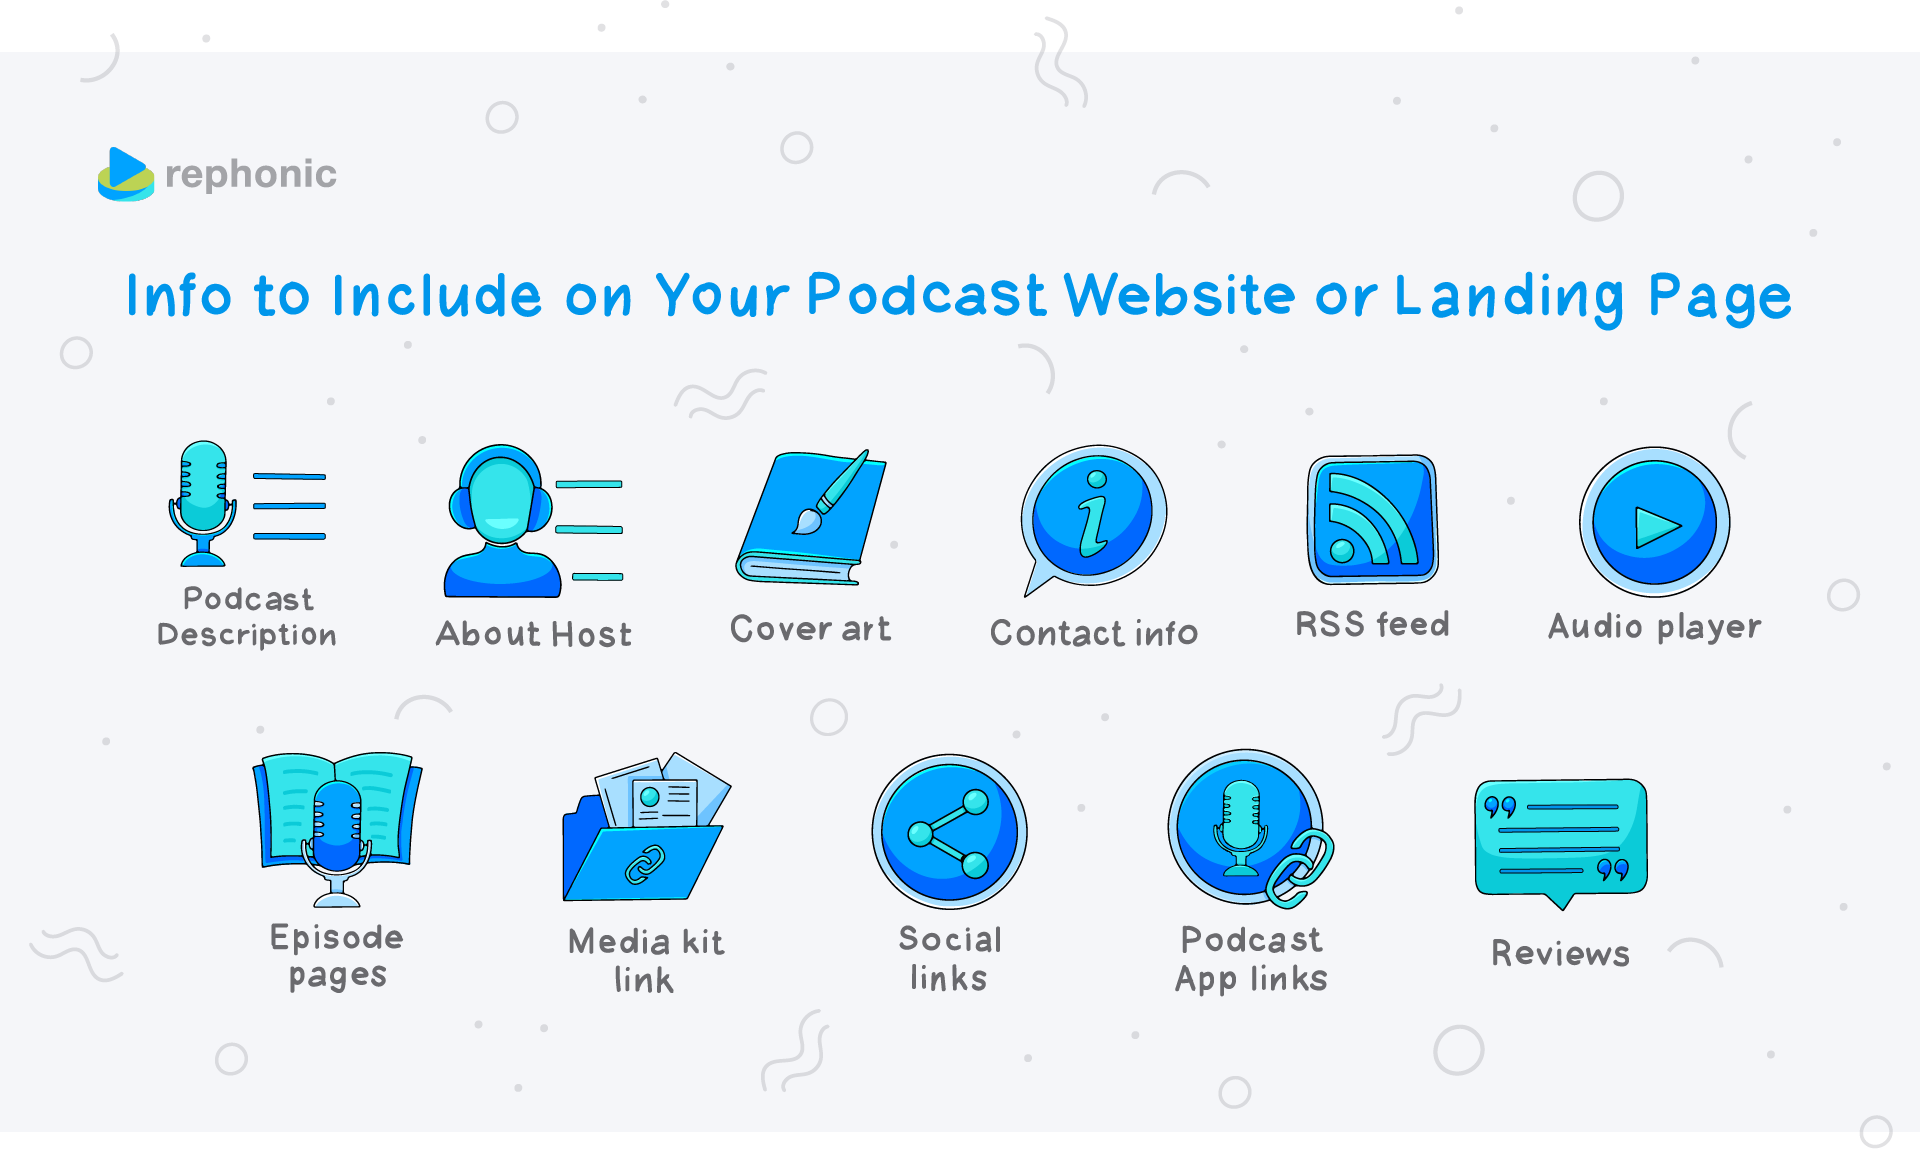 Infographic of what to include on podcast website or landing page